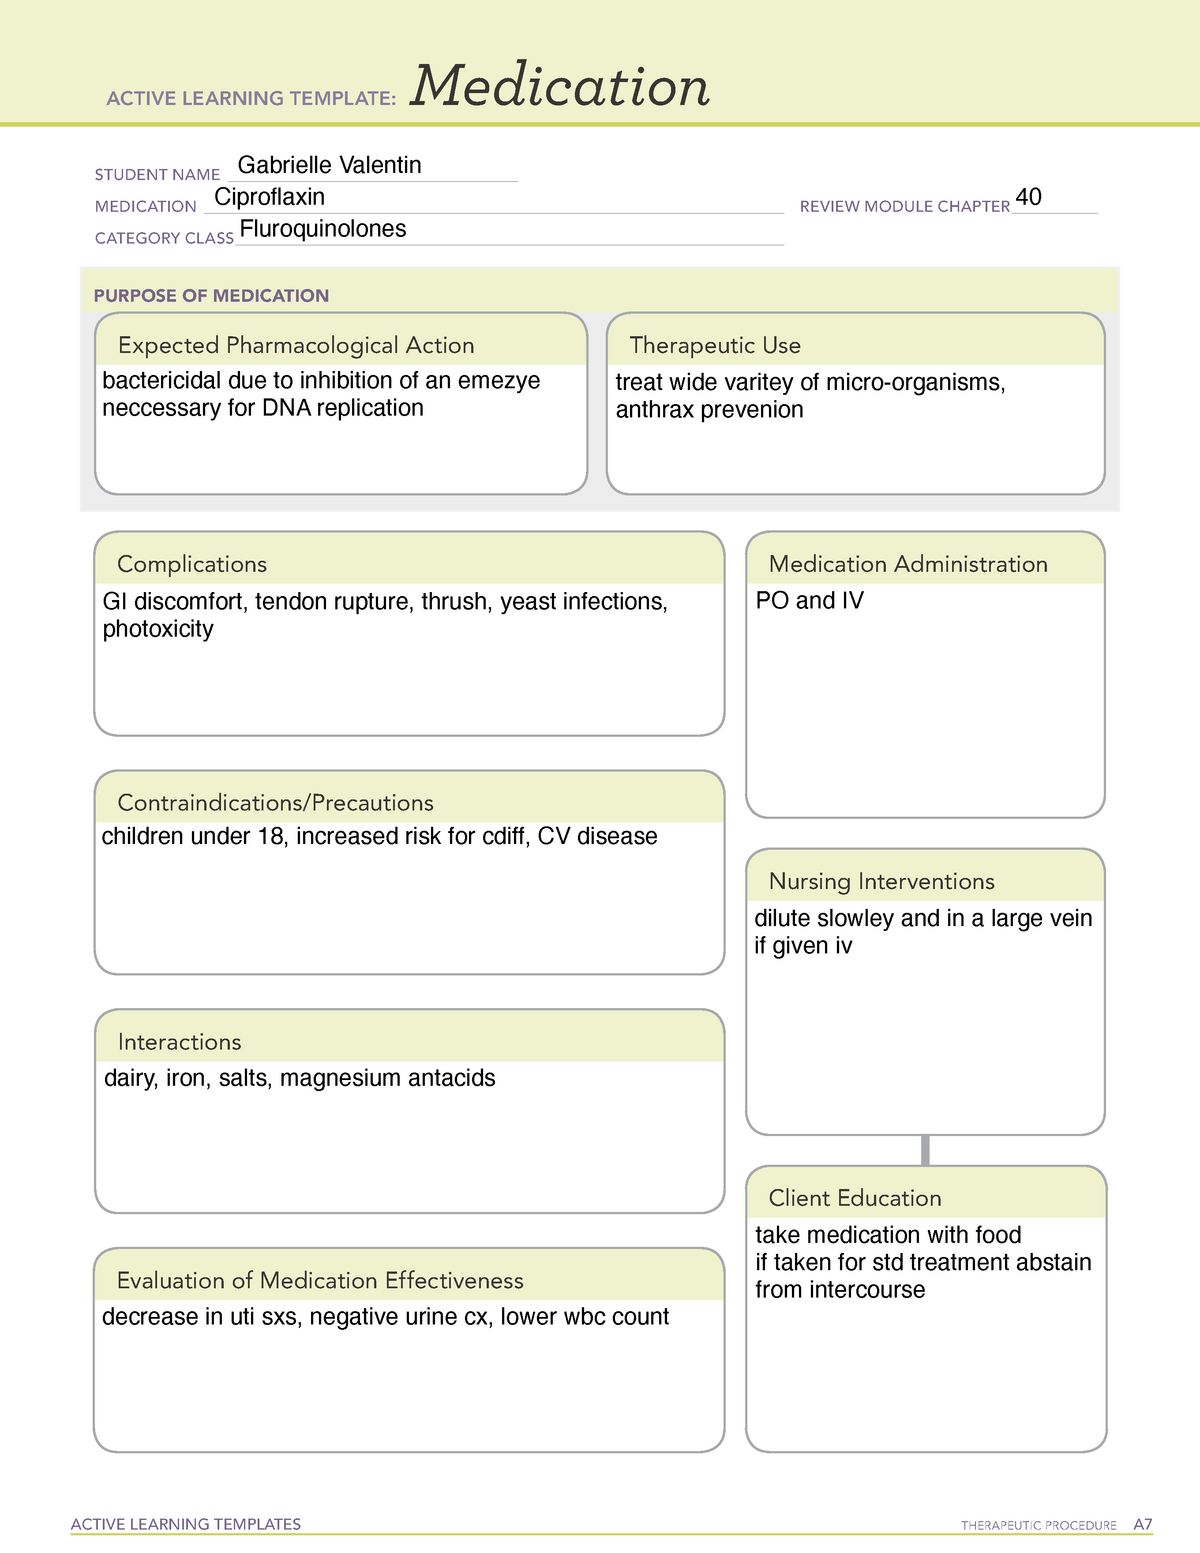 Medication Sheet Cipro ACTIVE LEARNING TEMPLATES THERAPEUTIC